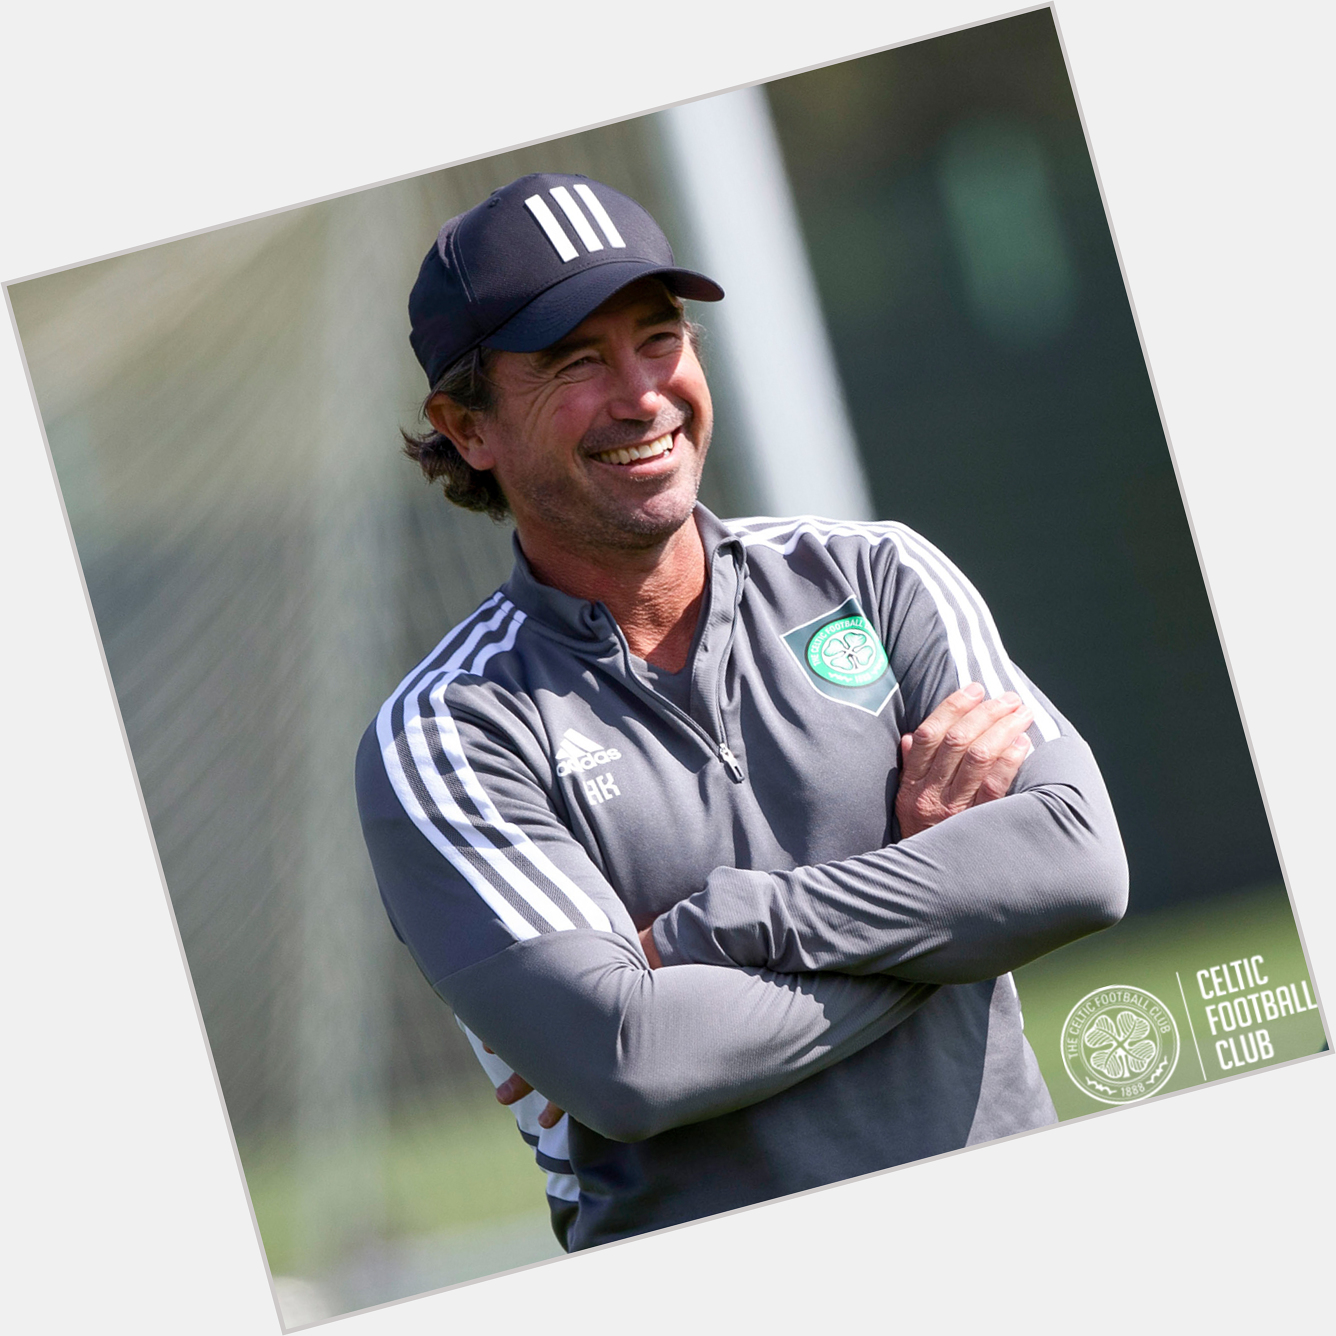  Happy birthday to our first team coach, Harry Kewell! 